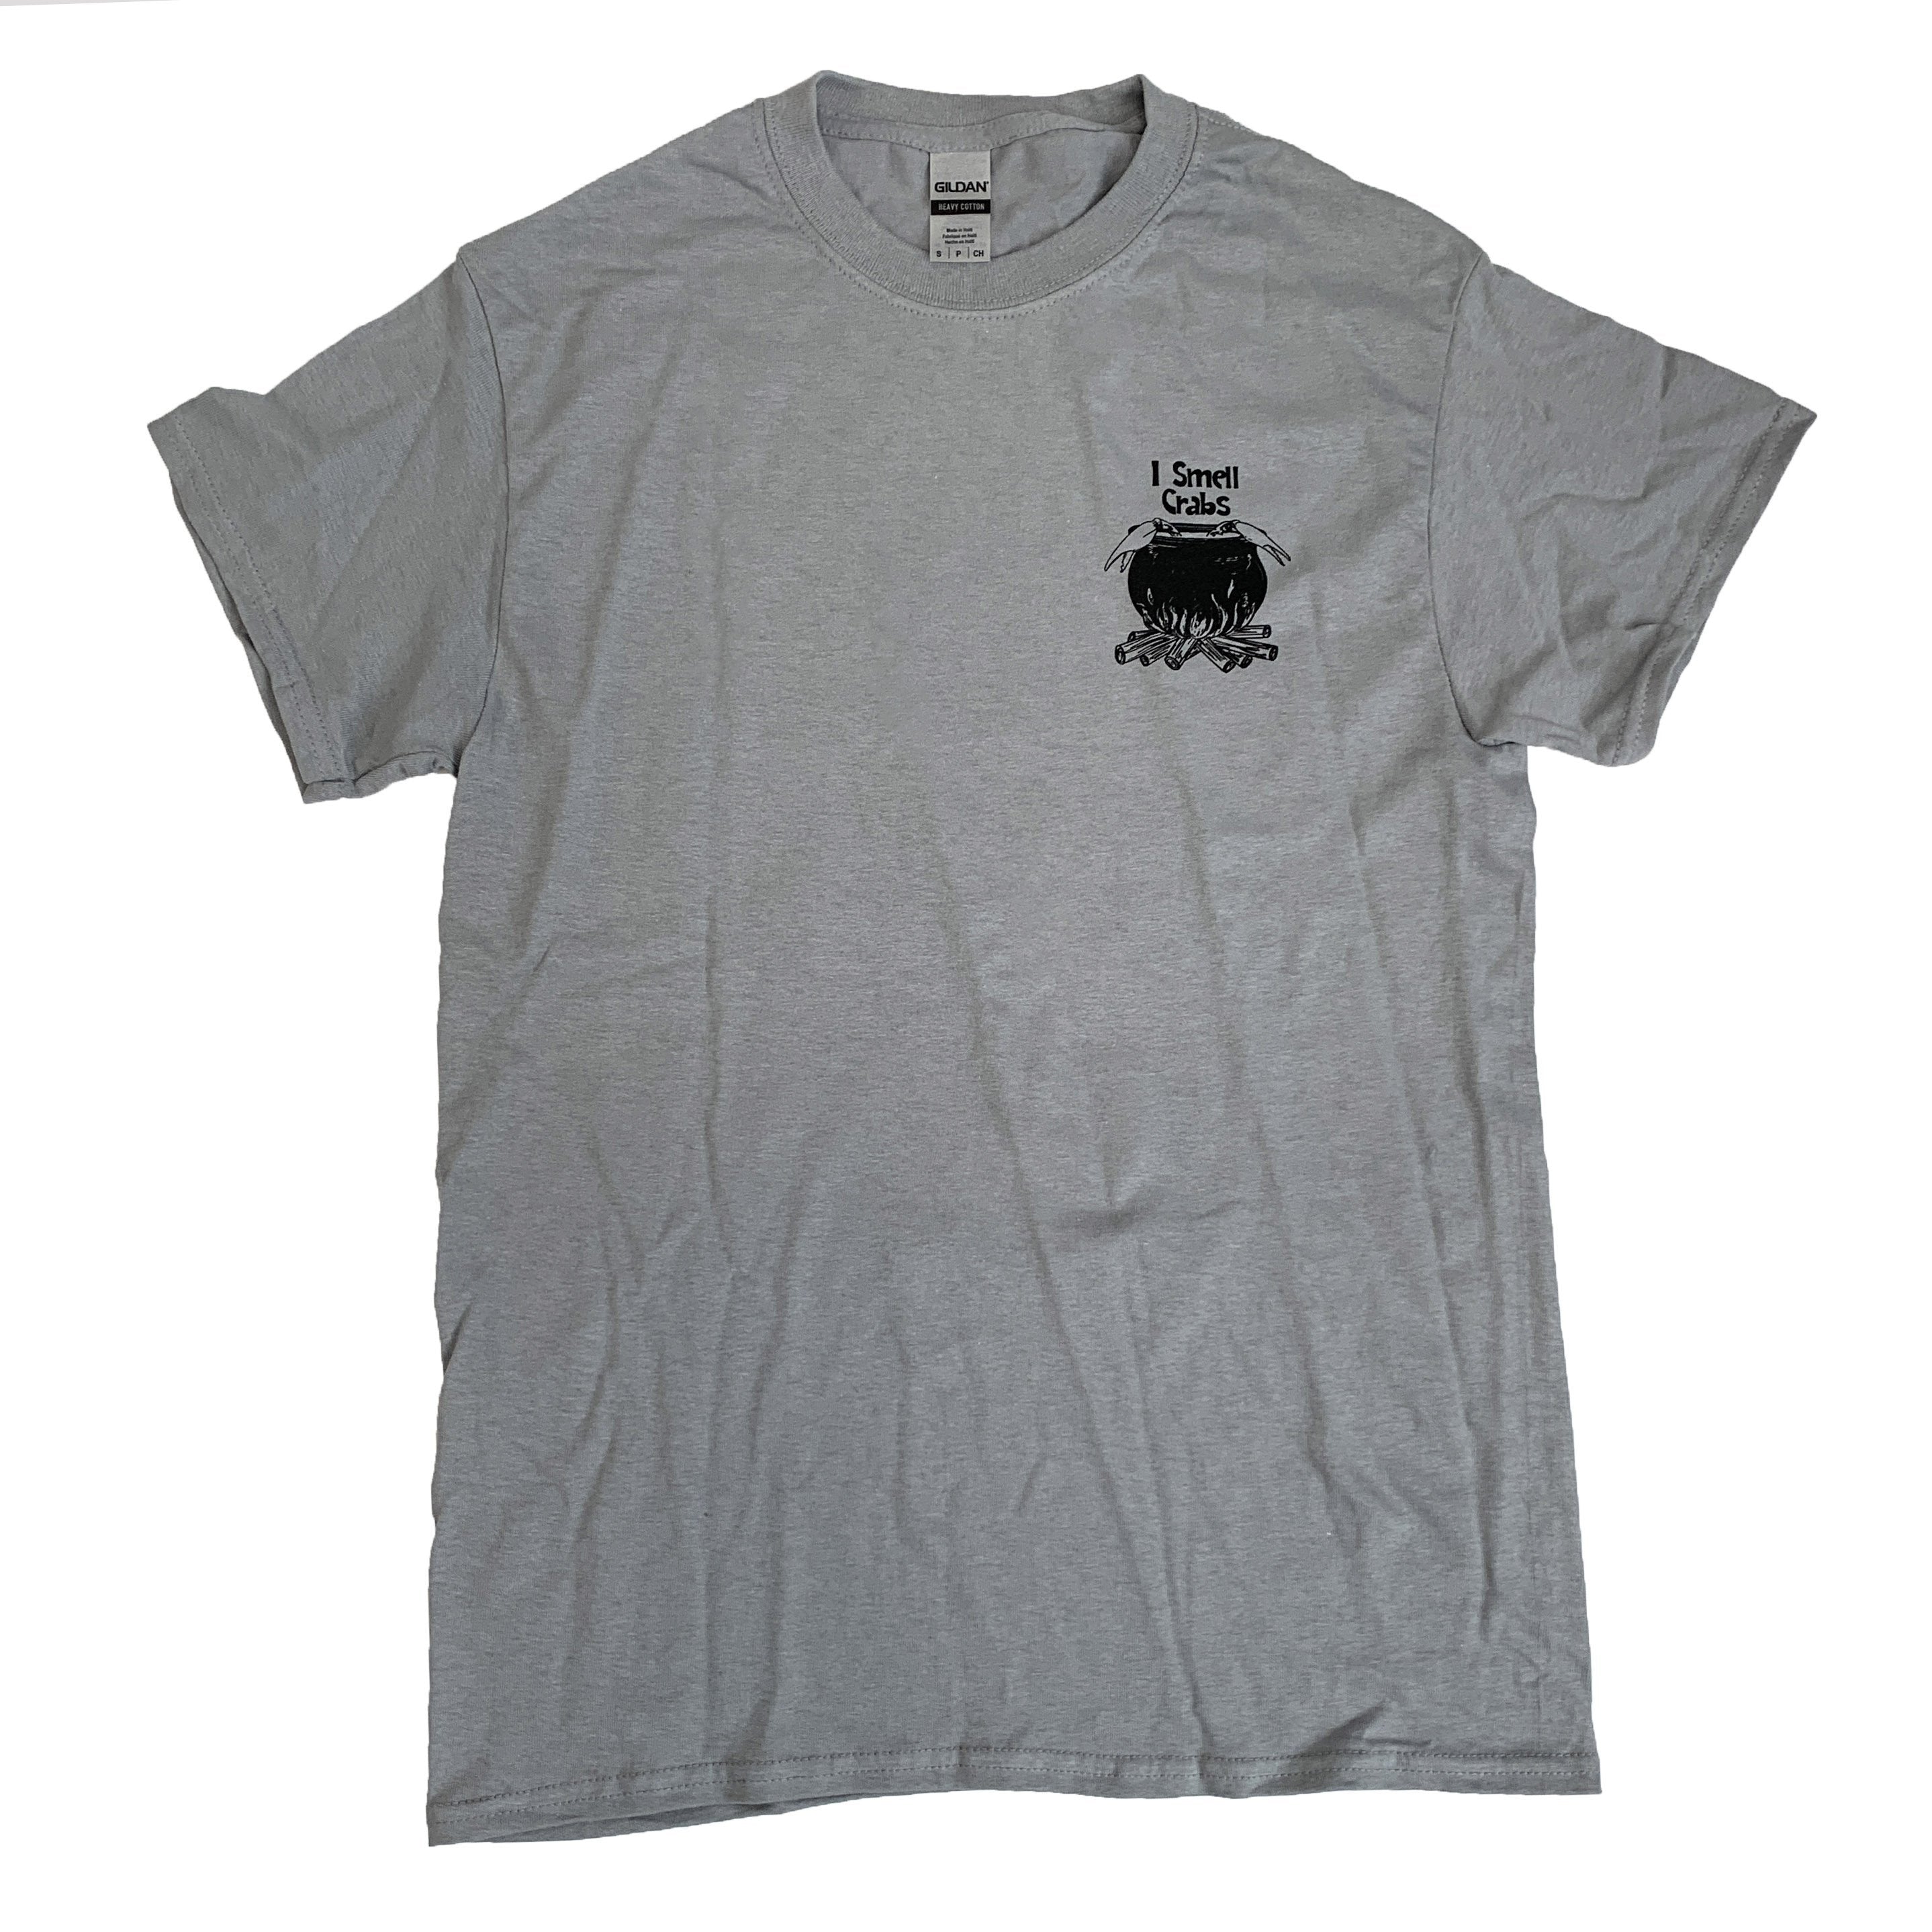 I Smell Crabs (Gravel) / Shirt - Route One Apparel